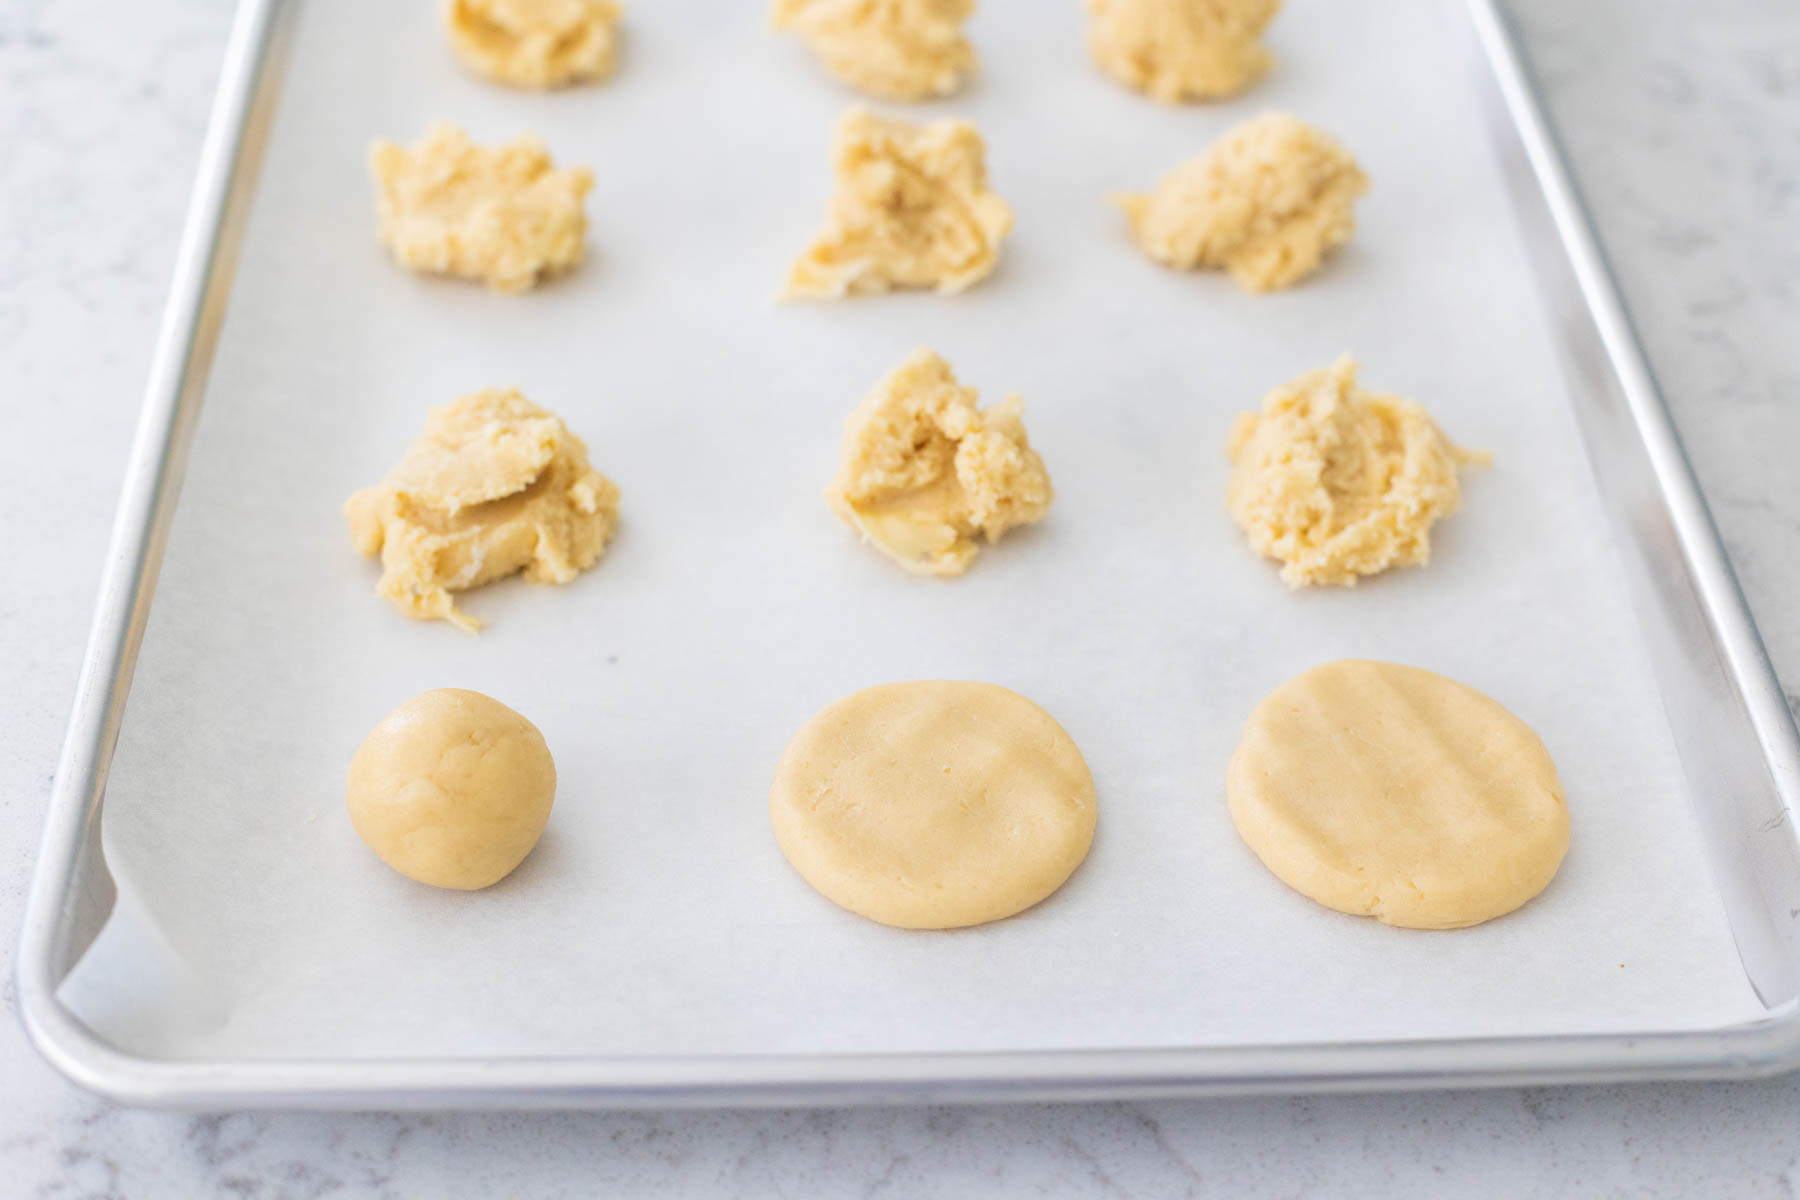 The baking sheet with cookies shows how to roll the dough into smooth balls and then flatten them into a pancake-like shape before baking.